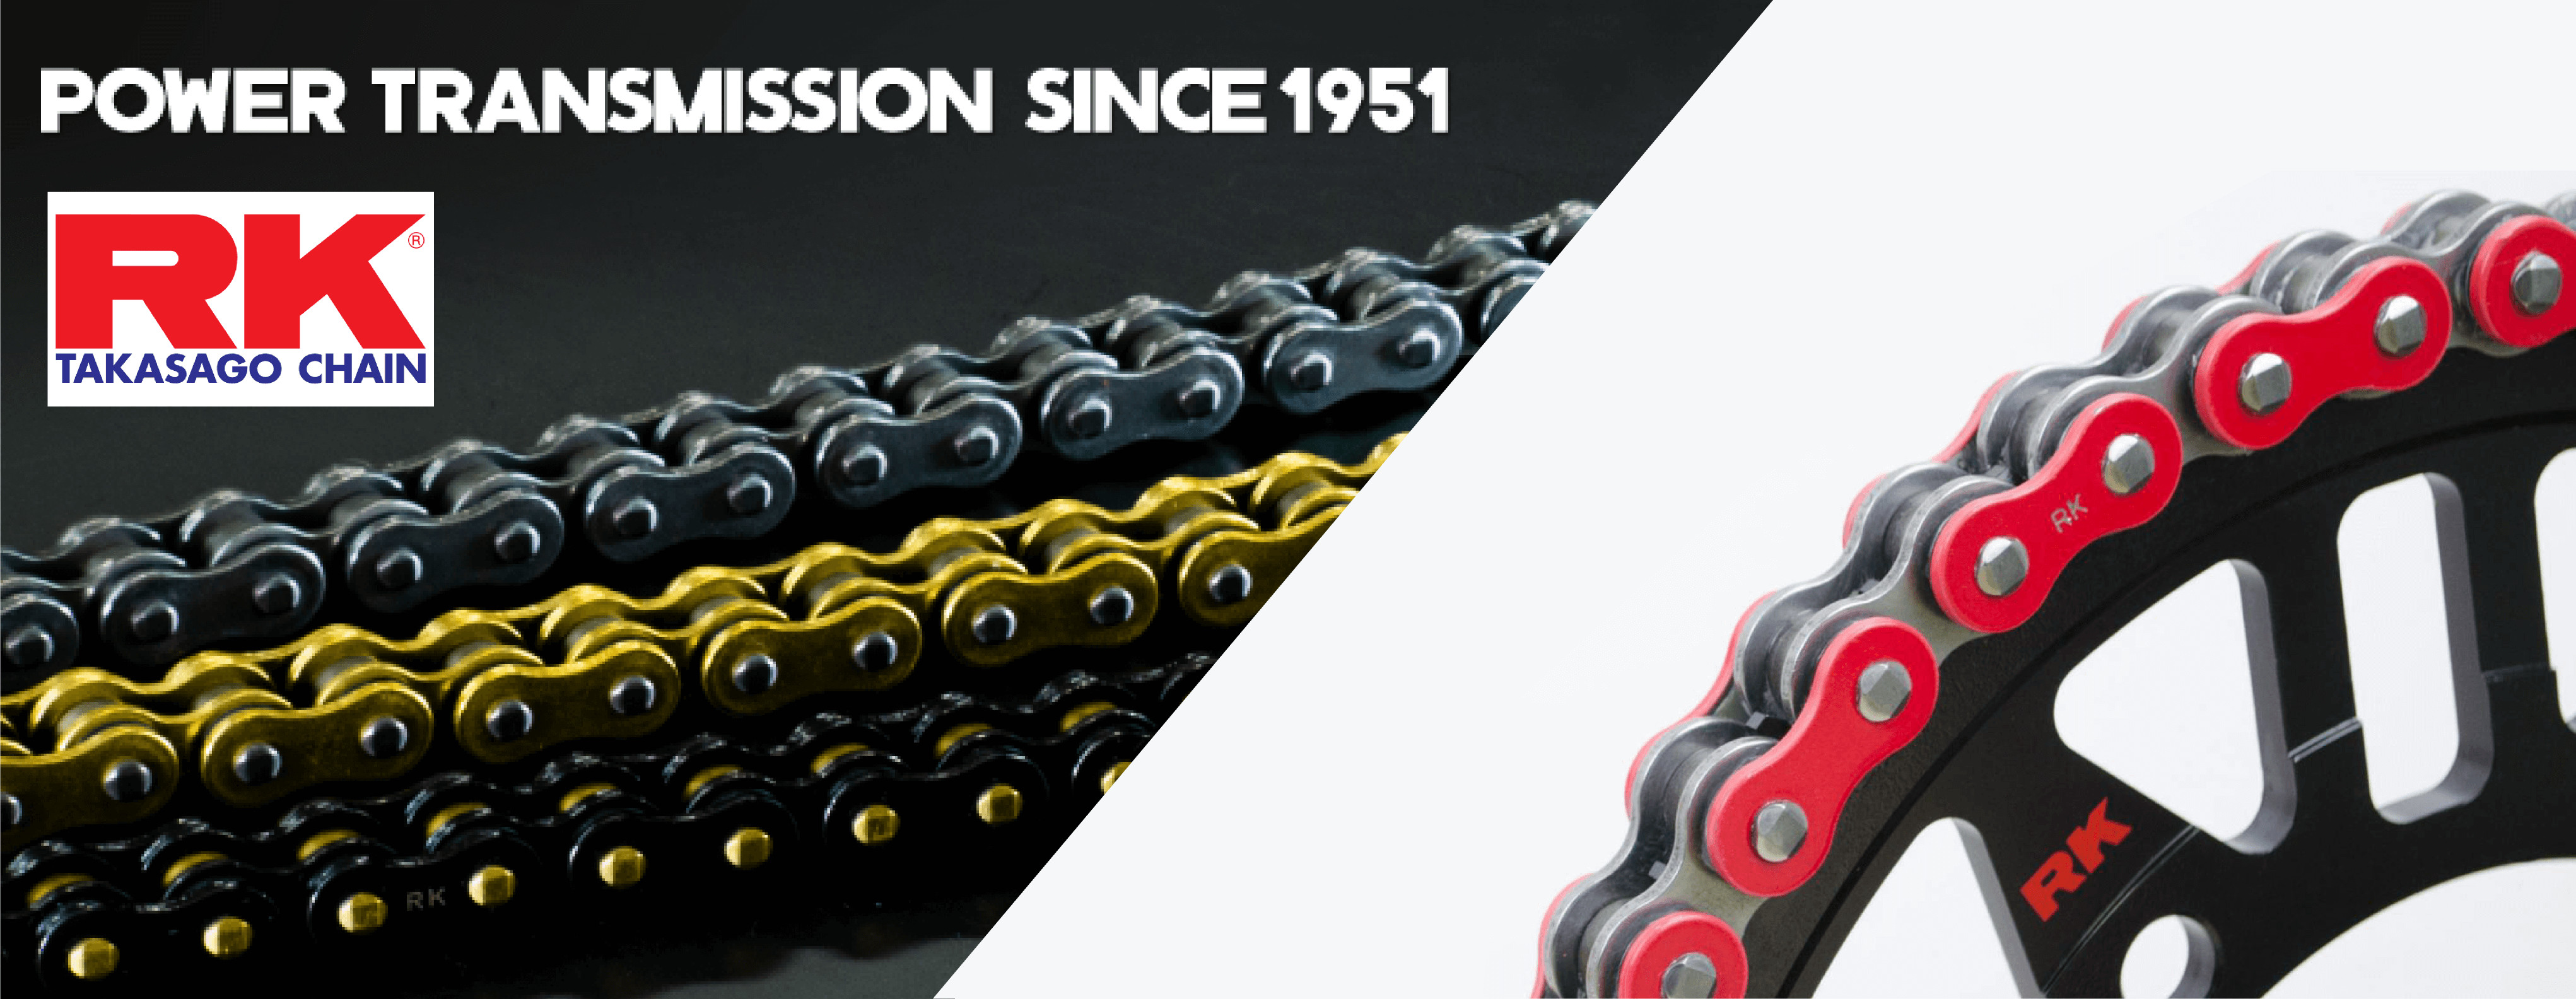 With over 60 years of experience in Motorcycle chains production is one of the leader in motorcycle chain's market. The constant quality year after year of the products, the innovation and high performance products has enabled RK to work with world-renowned Partners.